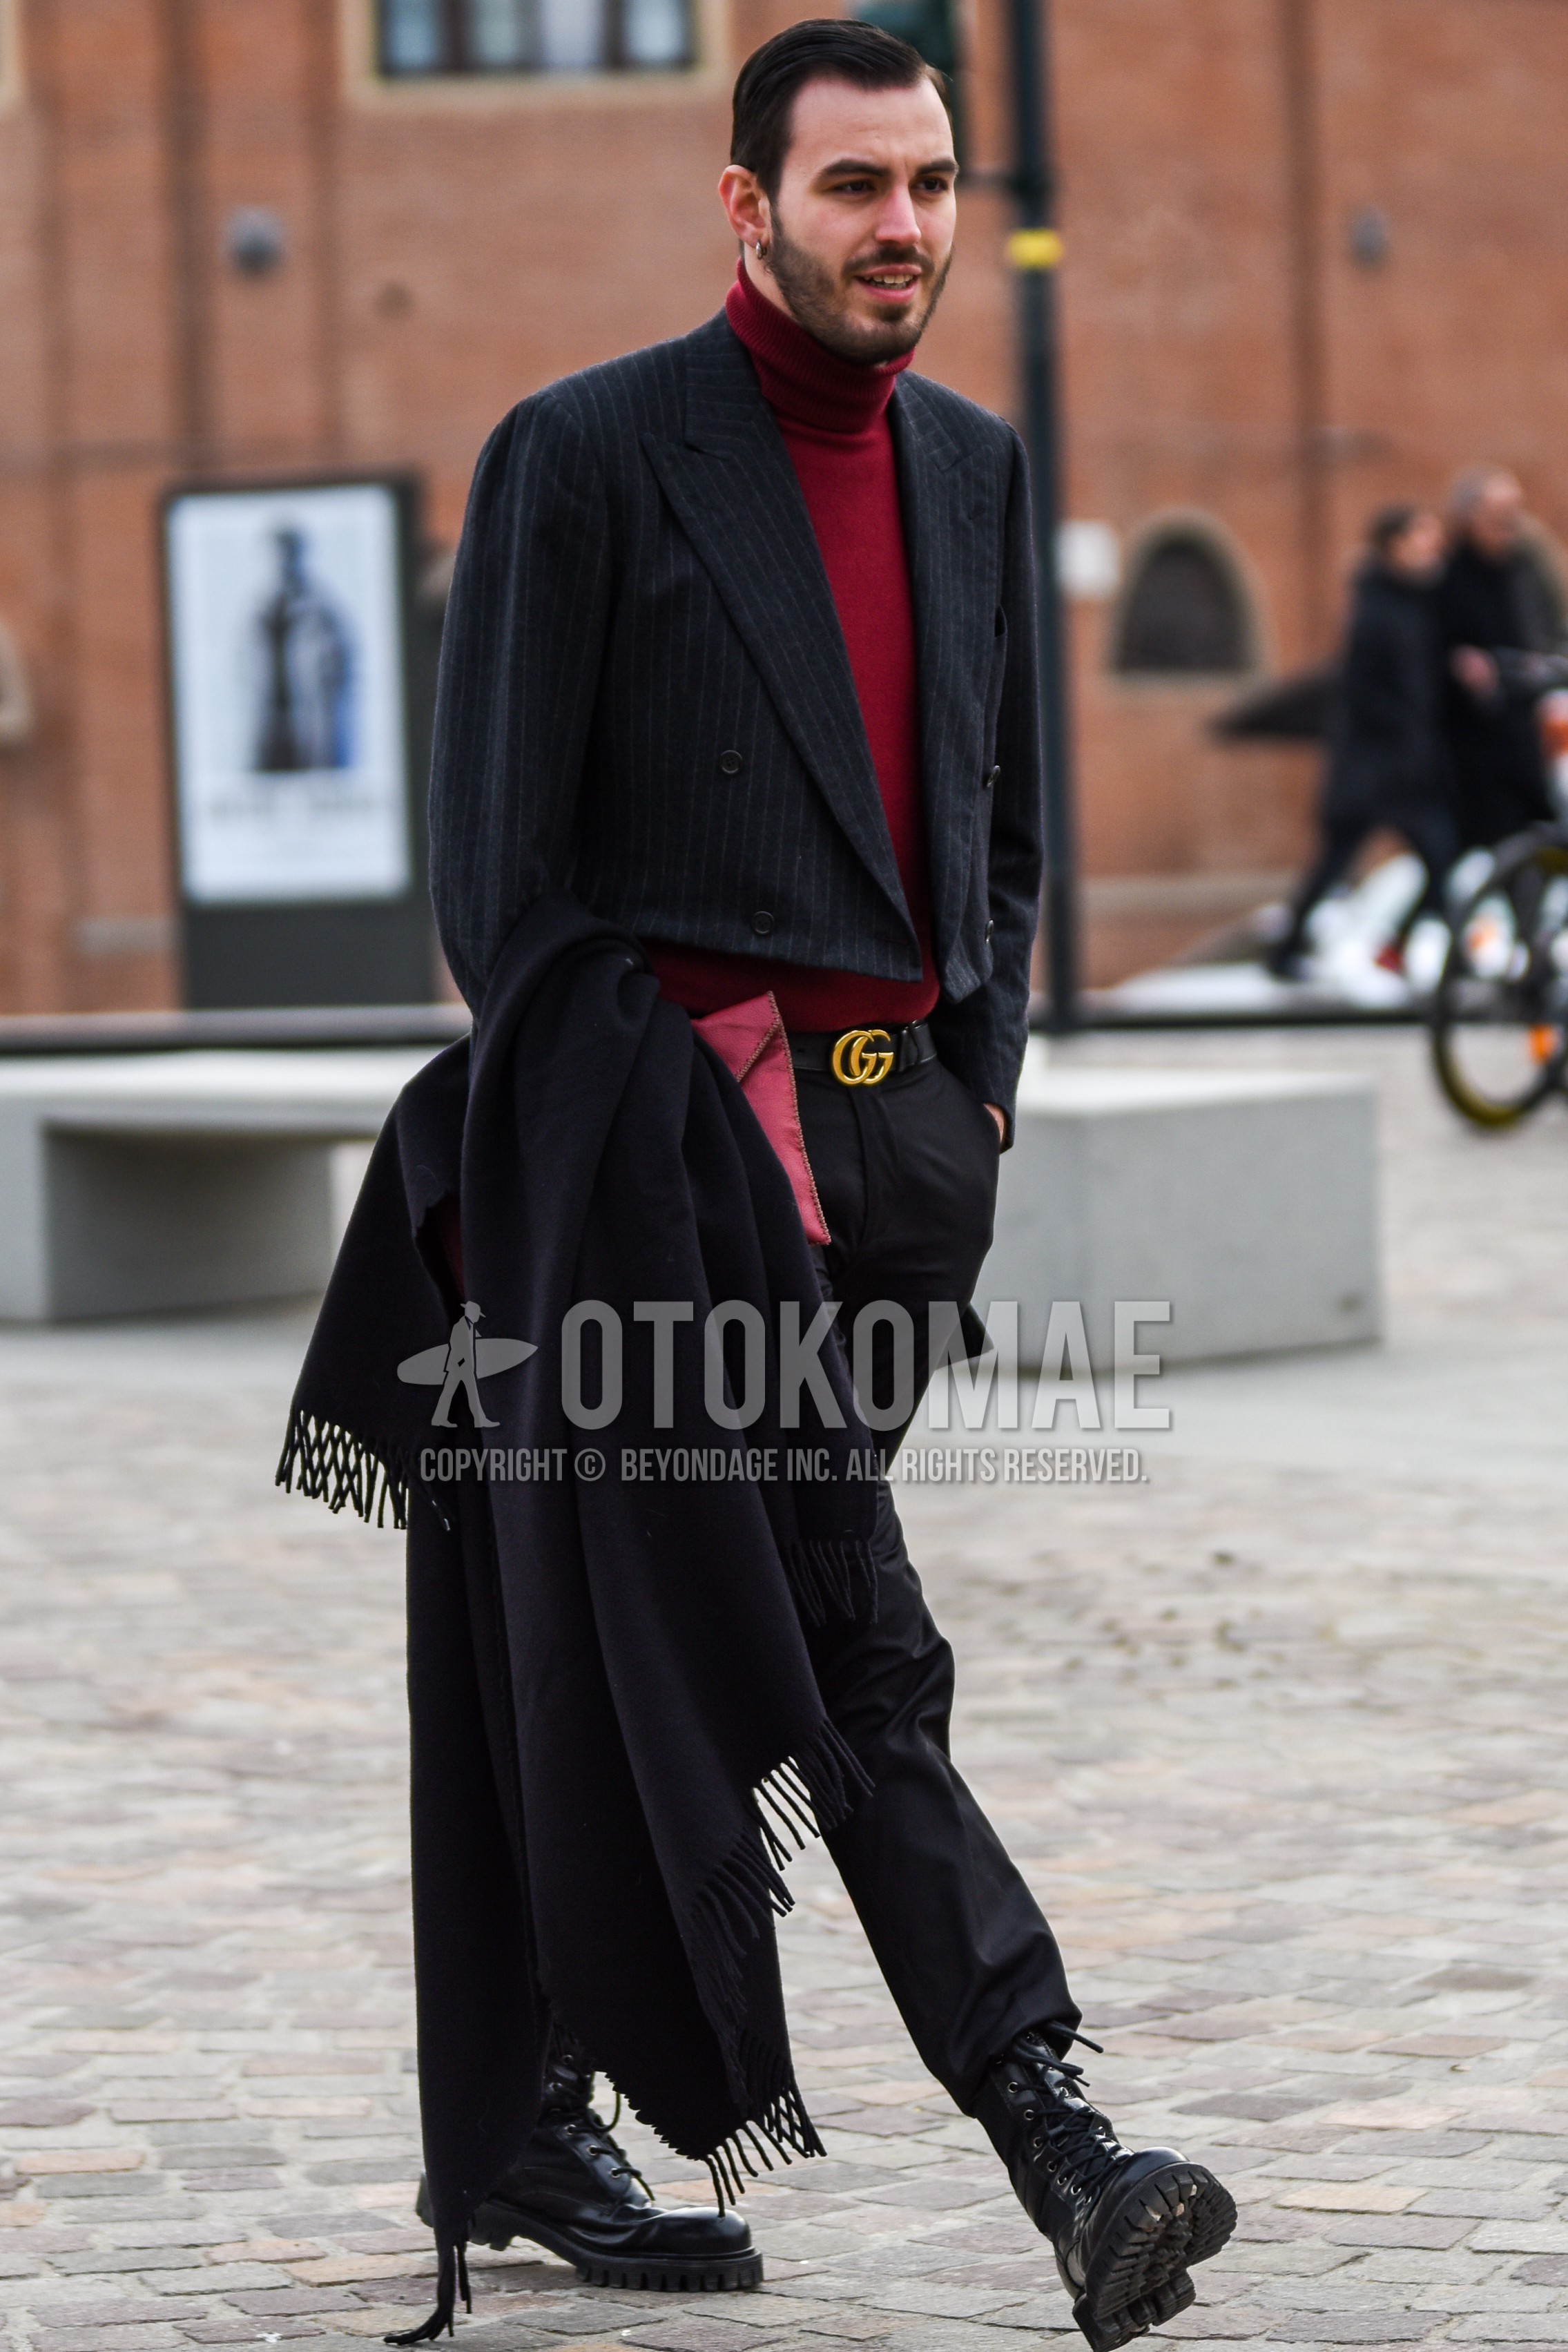 Men's spring autumn outfit with gray stripes tailored jacket, red plain turtleneck knit, black plain leather belt, black plain cotton pants, black  boots.